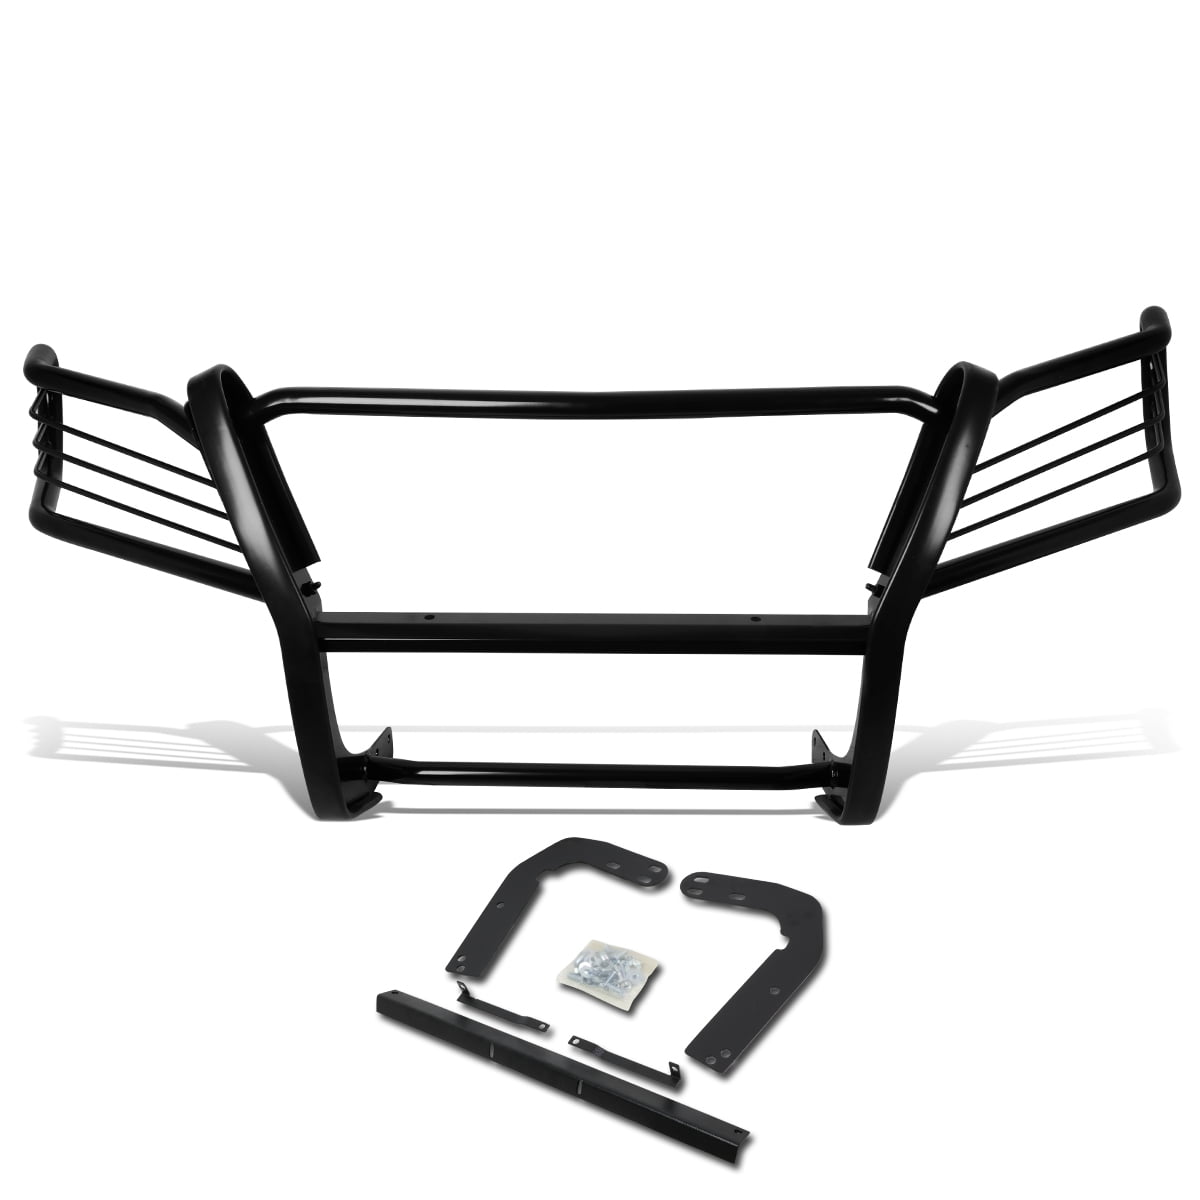 Fits 2006-2011 Mercedes ML Glass Stainless Steel 1.5" Bumper Grille/Brush Guard